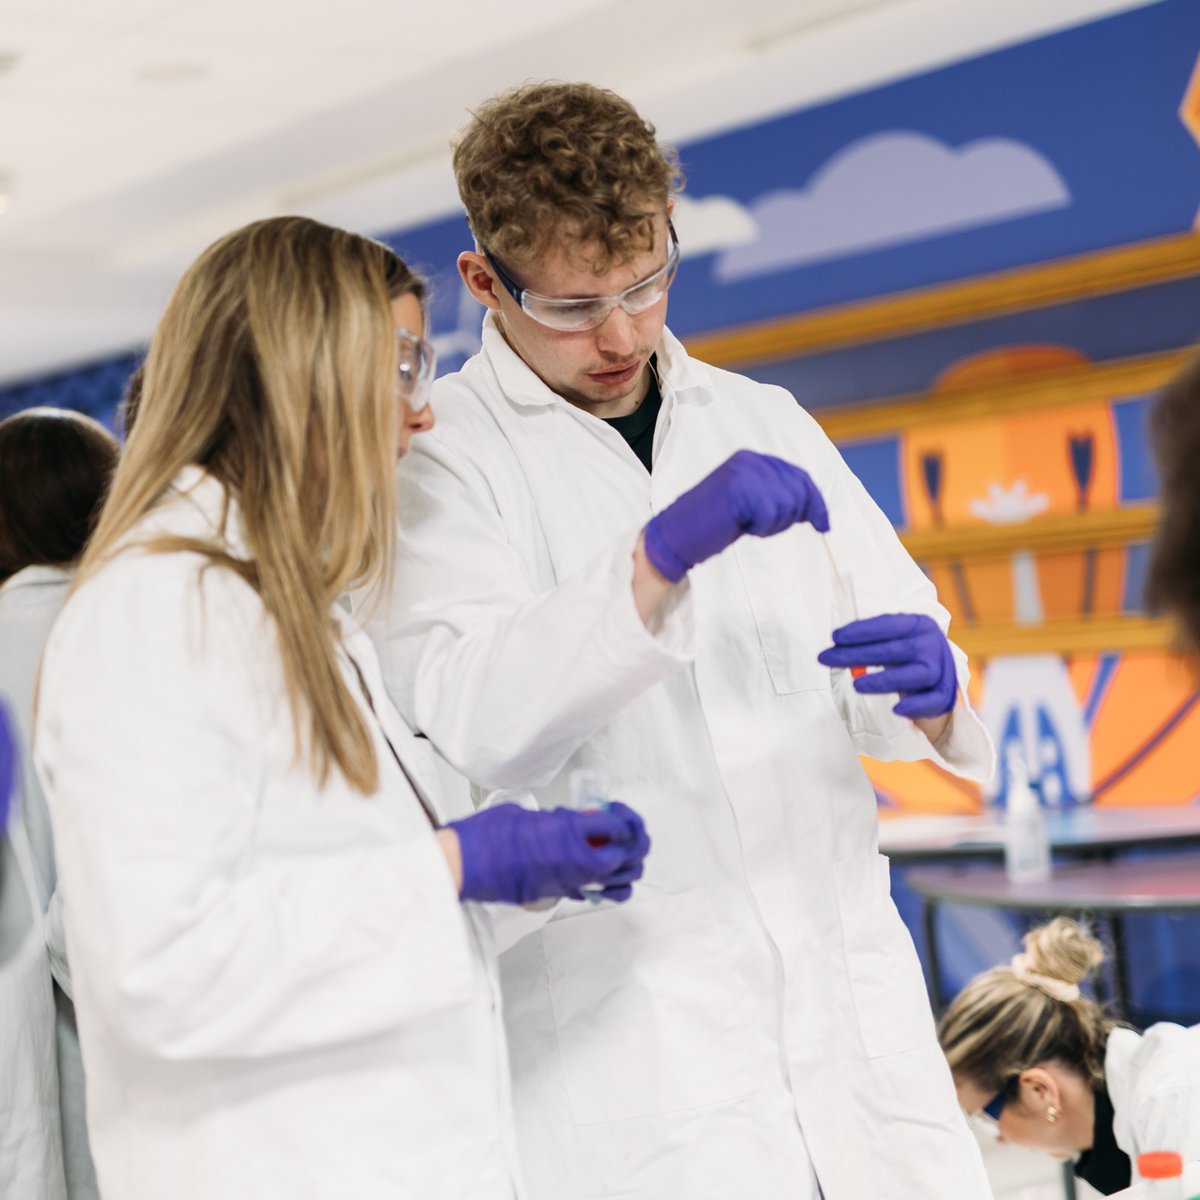 📣 Calling all adults! Celebrate Belfast’s Festival of Learning with W5’s FREE event, DNA In A Day! 🧬 This 18+ event is a hands-on experience for adults that will guide you through laboratory techniques such as DNA isolation and more! 🔗 Find out MORE: bit.ly/DNAinaDay-W5